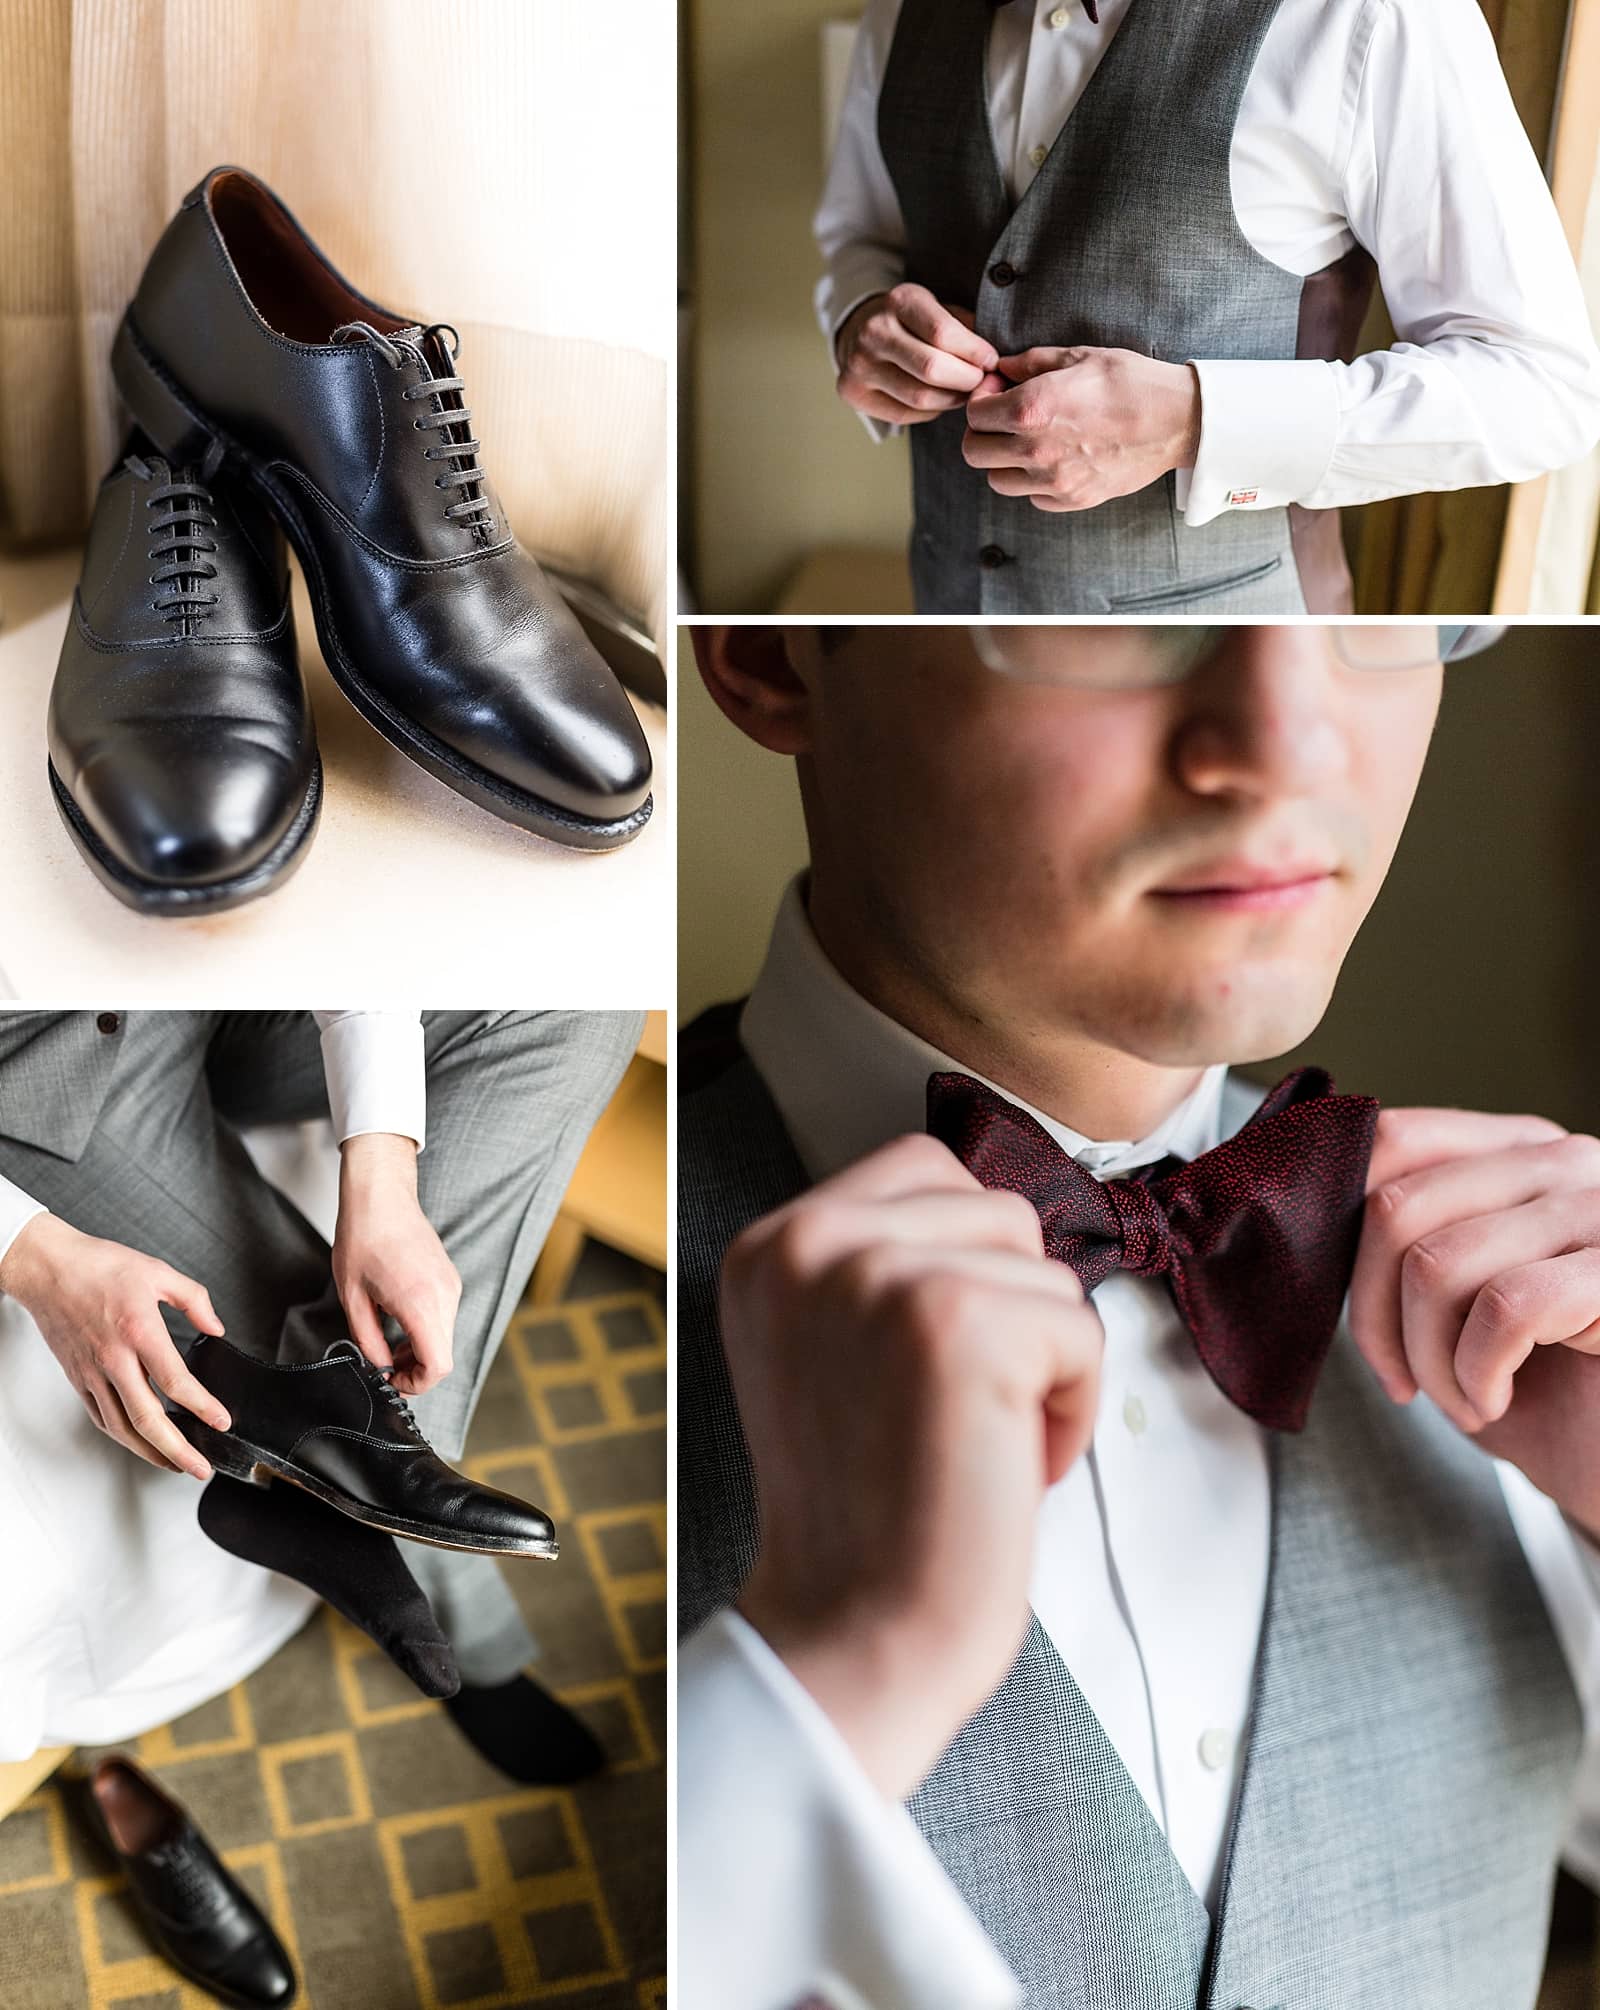 Groom details, dress shoes, bowtie, groom getting ready